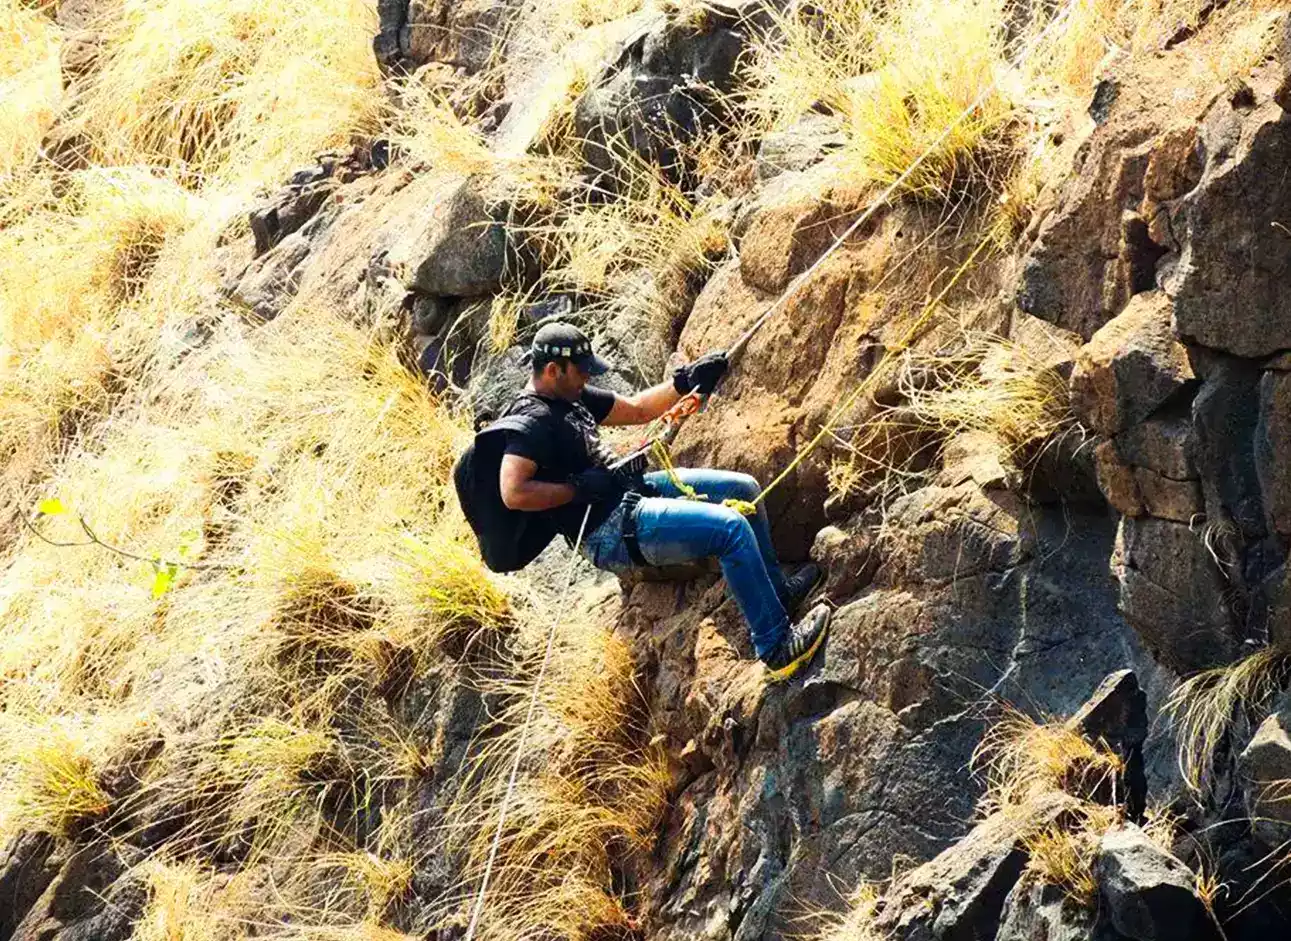 Rock Climbing and Rappelling - Thrilling adventures on cliffs and descents